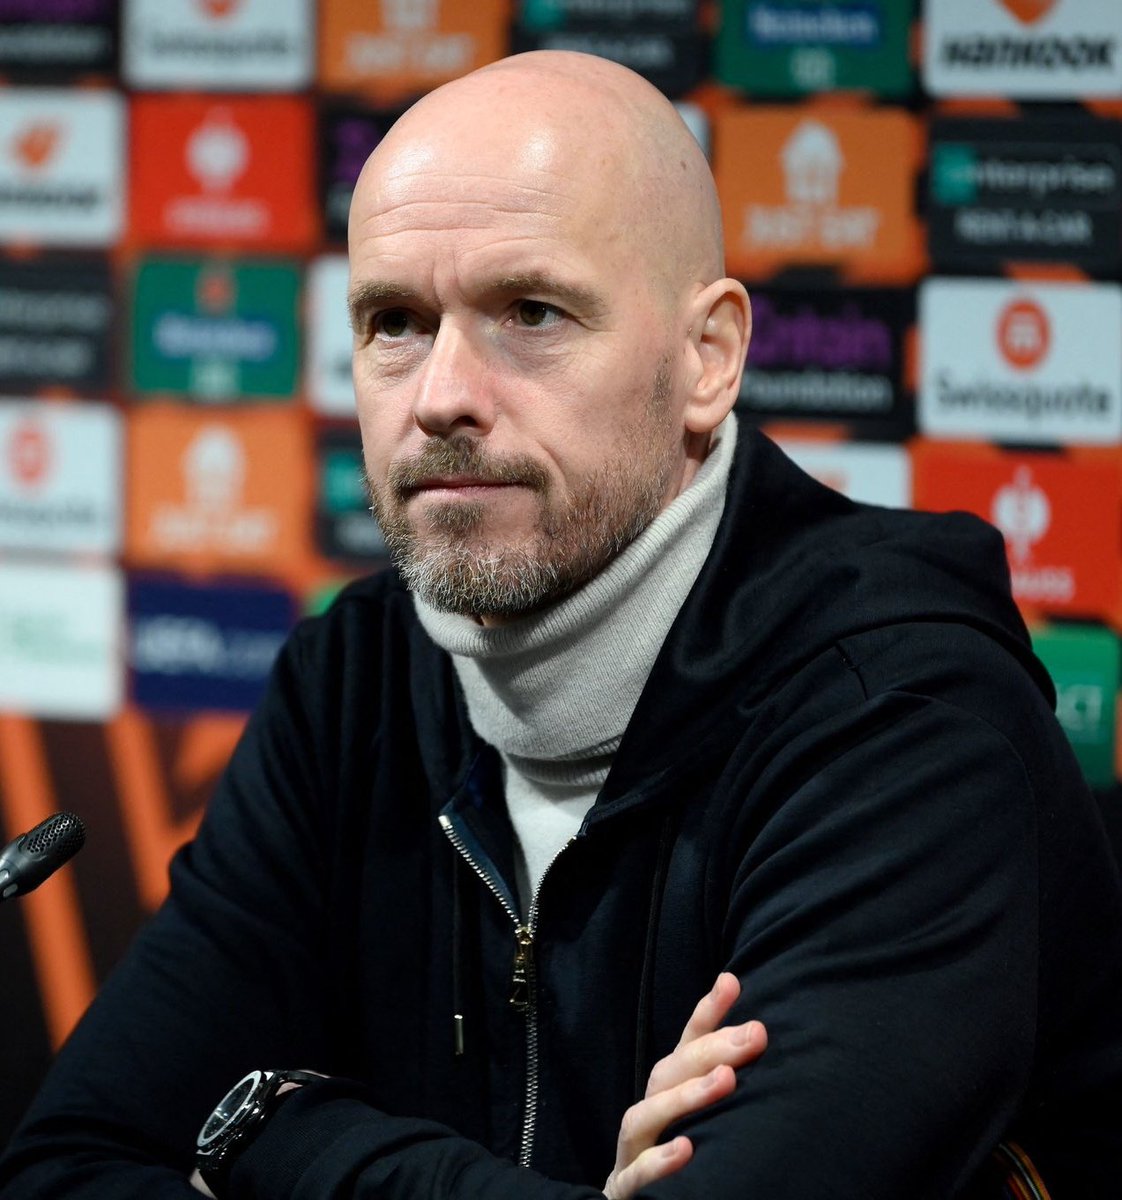 Ten Hag: “Last year there were lots of reservations when I spoke with players to join us. Now they see the ambition in this project — they want to come. Many quality players really want to join Man Utd now”.

The foundation has been laid. Time to BACK him.